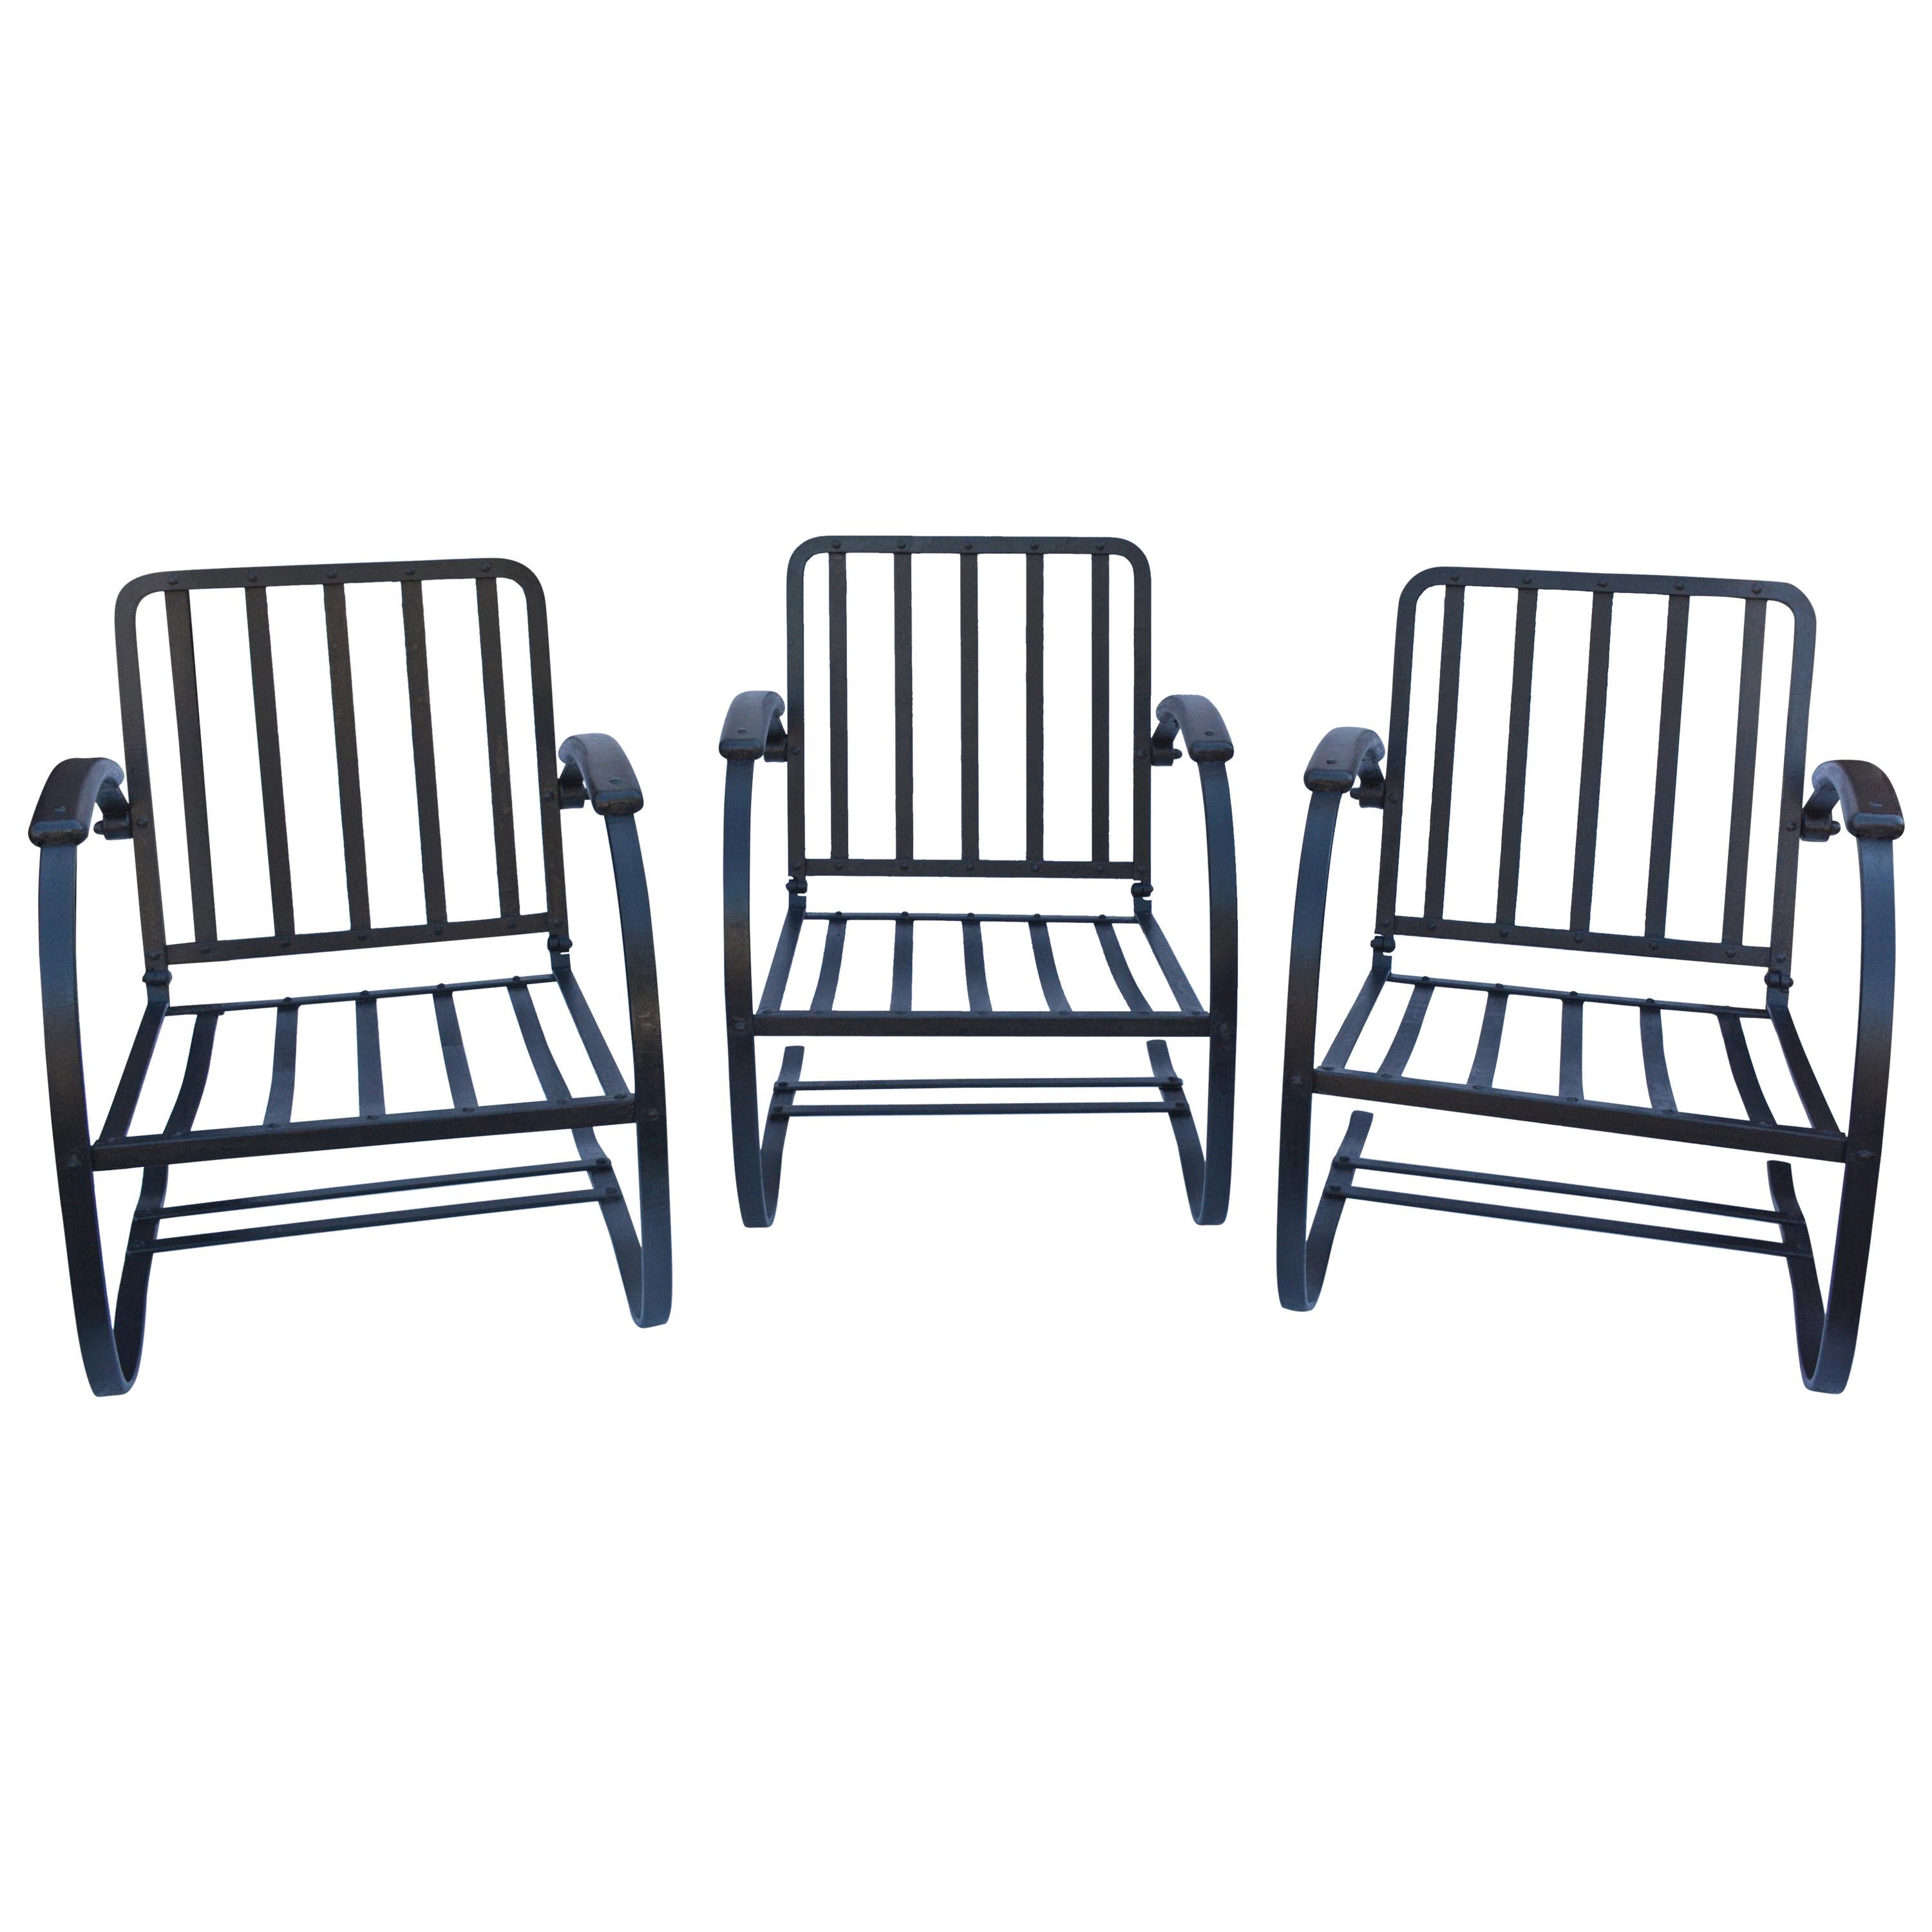 Three Vintage Wrought-Iron Patio Spring Chairs